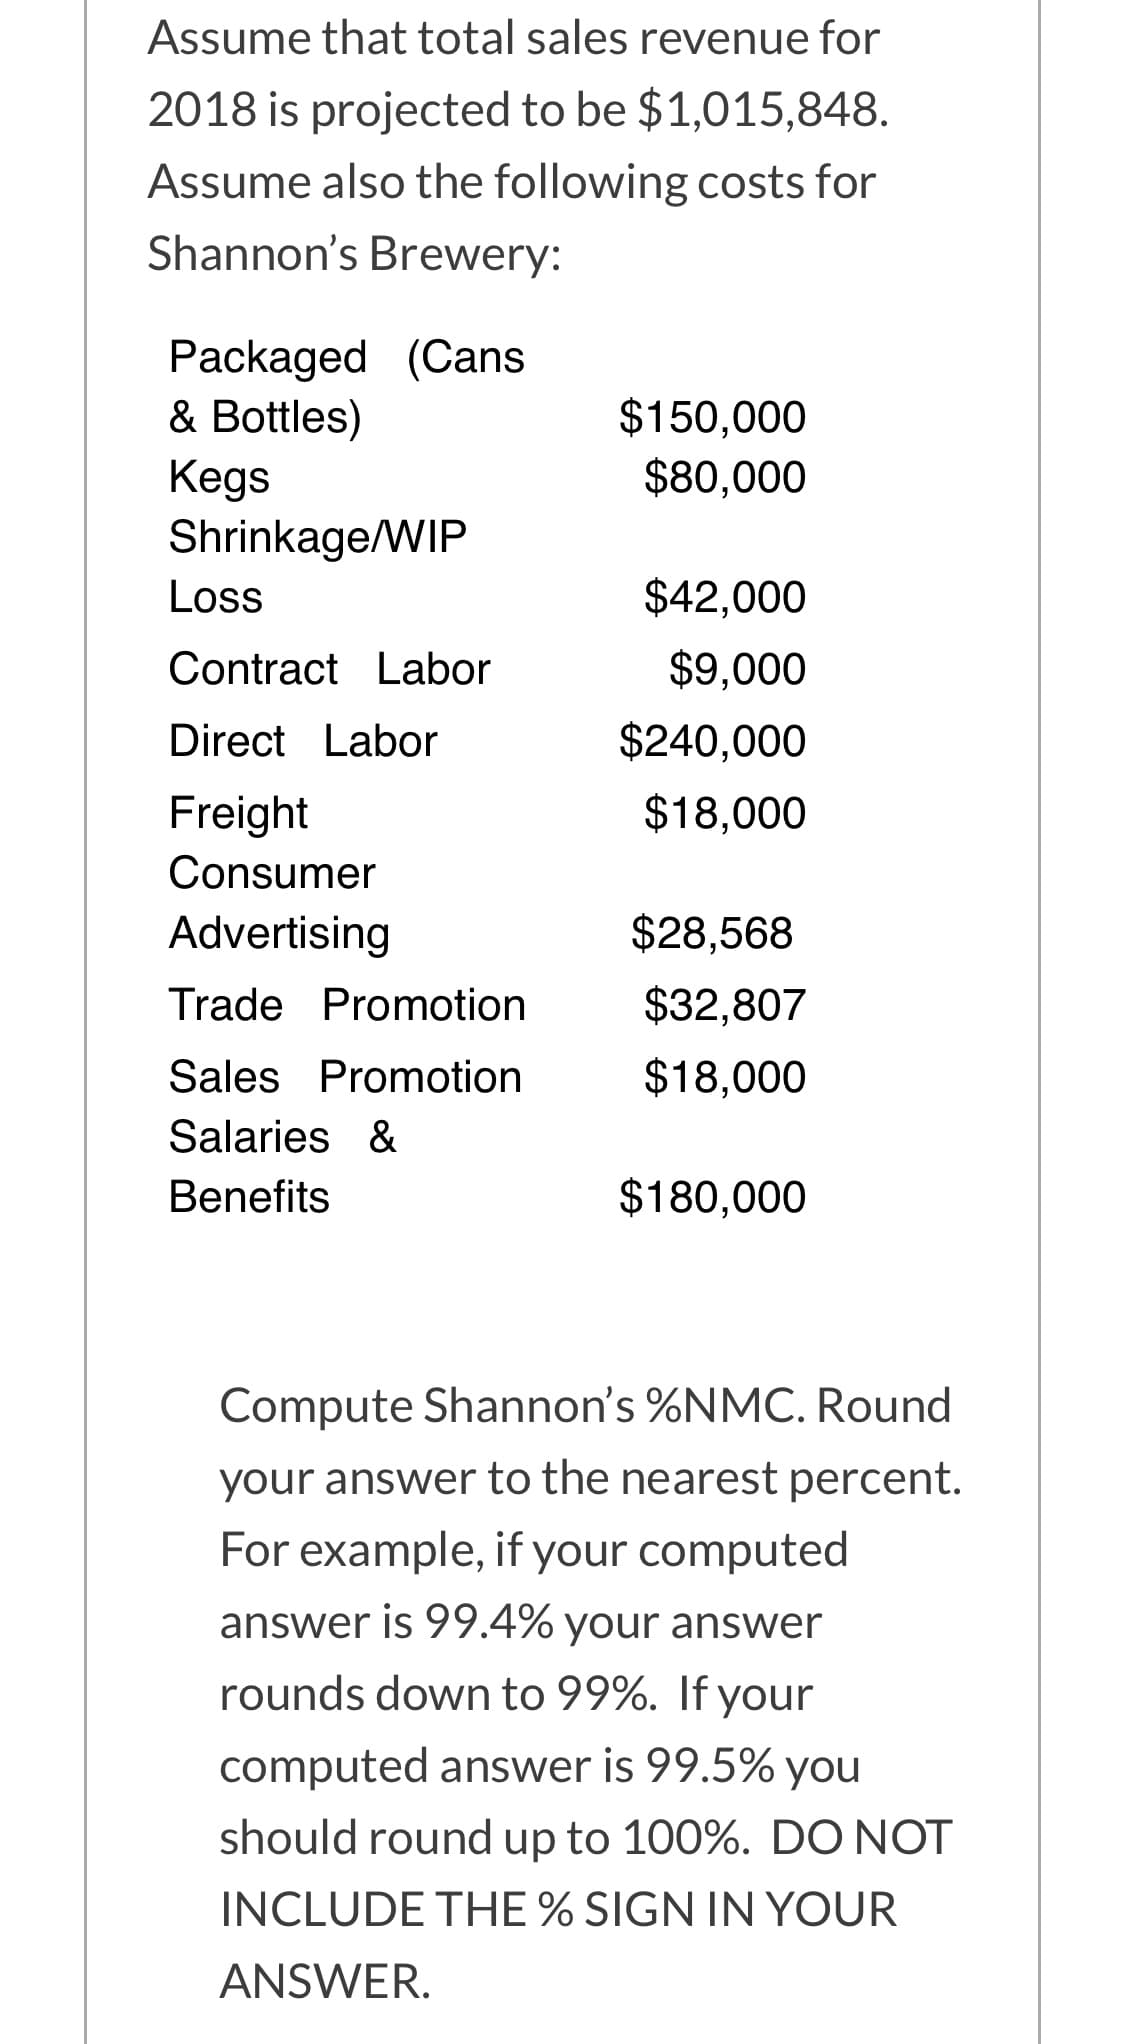 Assume that total sales revenue for
2018 is projected to be $1,015,848.
Assume also the following costs for
Shannon's Brewery:
Packaged (Cans
& Bottles)
Kegs
Shrinkage/WIP
$150,000
$80,000
Loss
$42,000
Contract Labor
$9,000
Direct Labor
$240,000
Freight
$18,000
Consumer
Advertising
$28,568
Trade Promotion
$32,807
Sales Promotion
$18,000
Salaries &
Benefits
$180,000
Compute Shannon's %NMC. Round
your answer to the nearest percent.
For example, if your computed
answer is 99.4% your answer
rounds down to 99%. If your
computed answer is 99.5% you
should round up to 100%. DO NOT
INCLUDE THE % SIGN IN YOUR
ANSWER.
